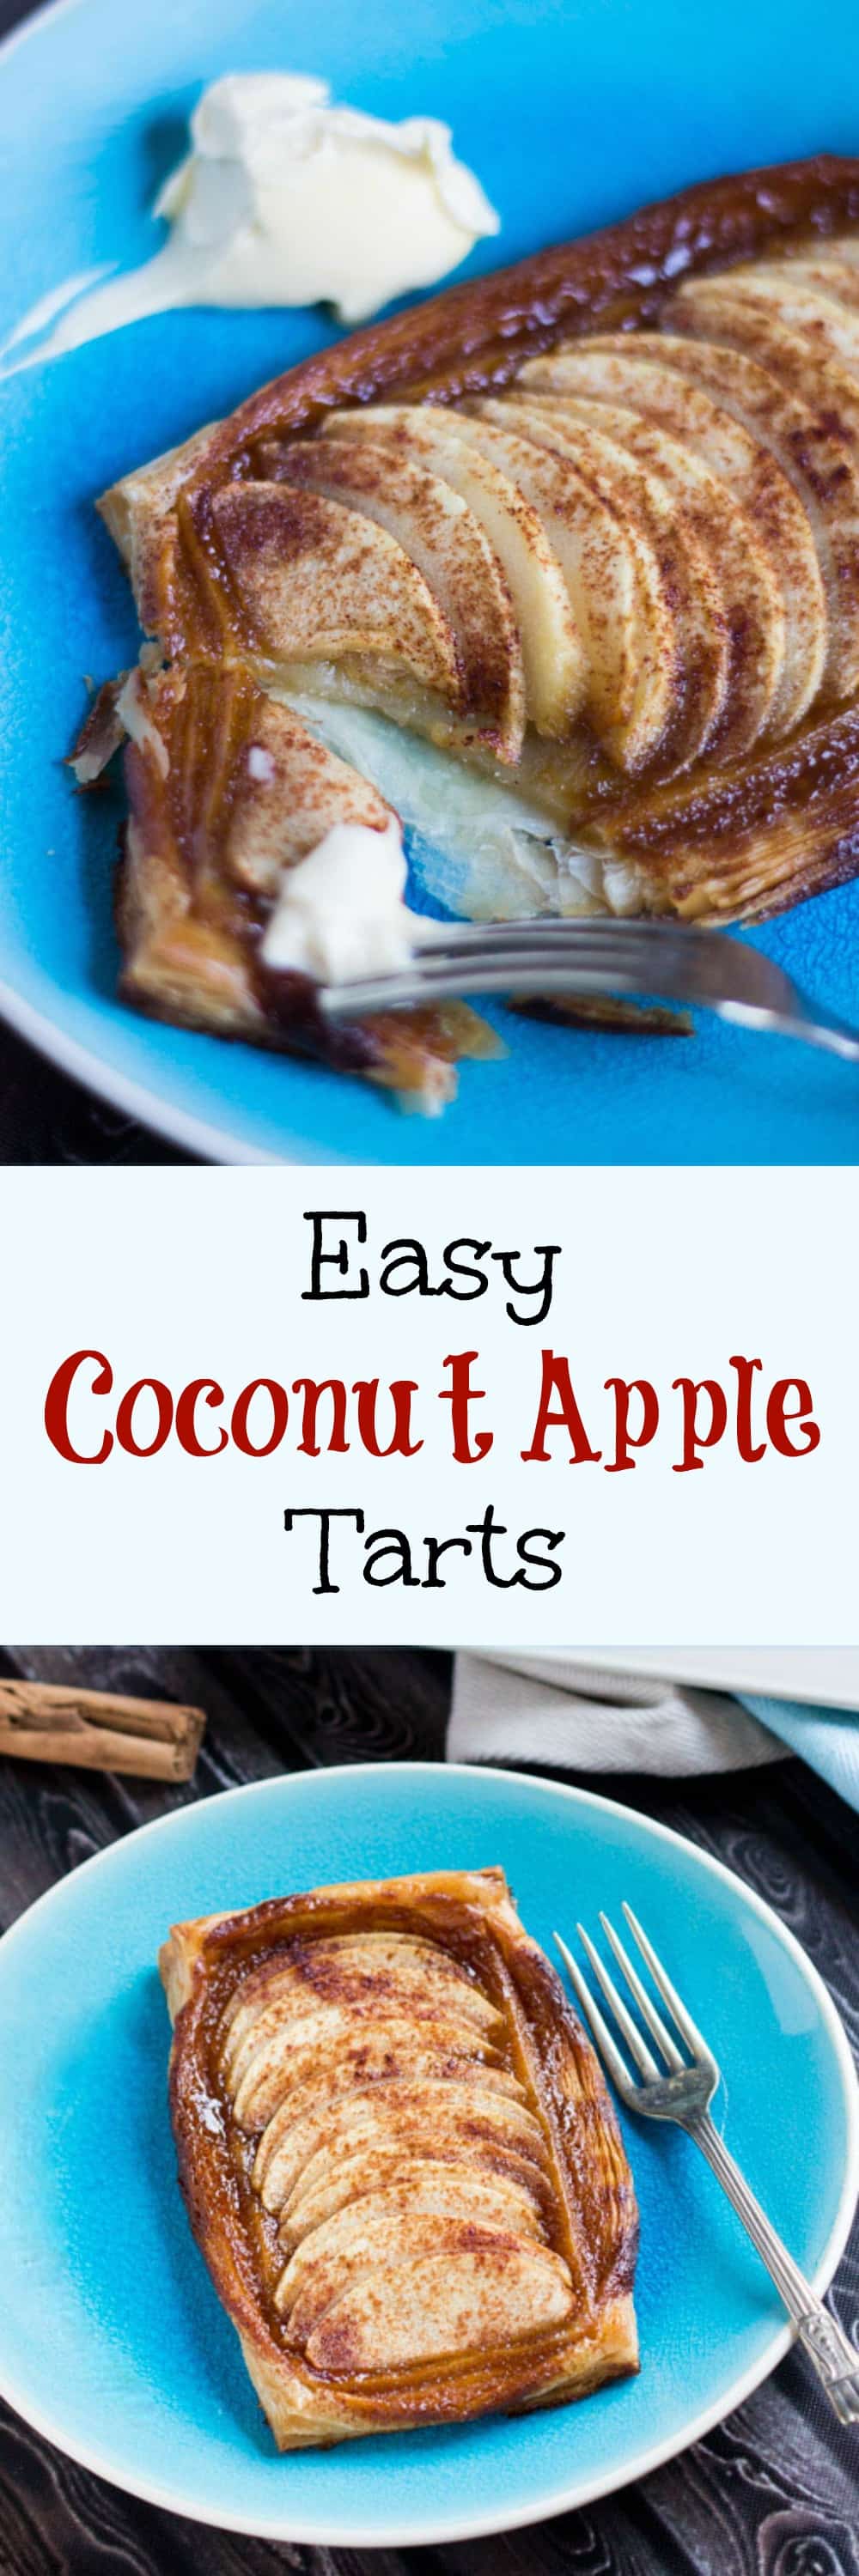 Easy Coconut Apple Tarts.  Simple to prepare in advance & great for entertaining. 